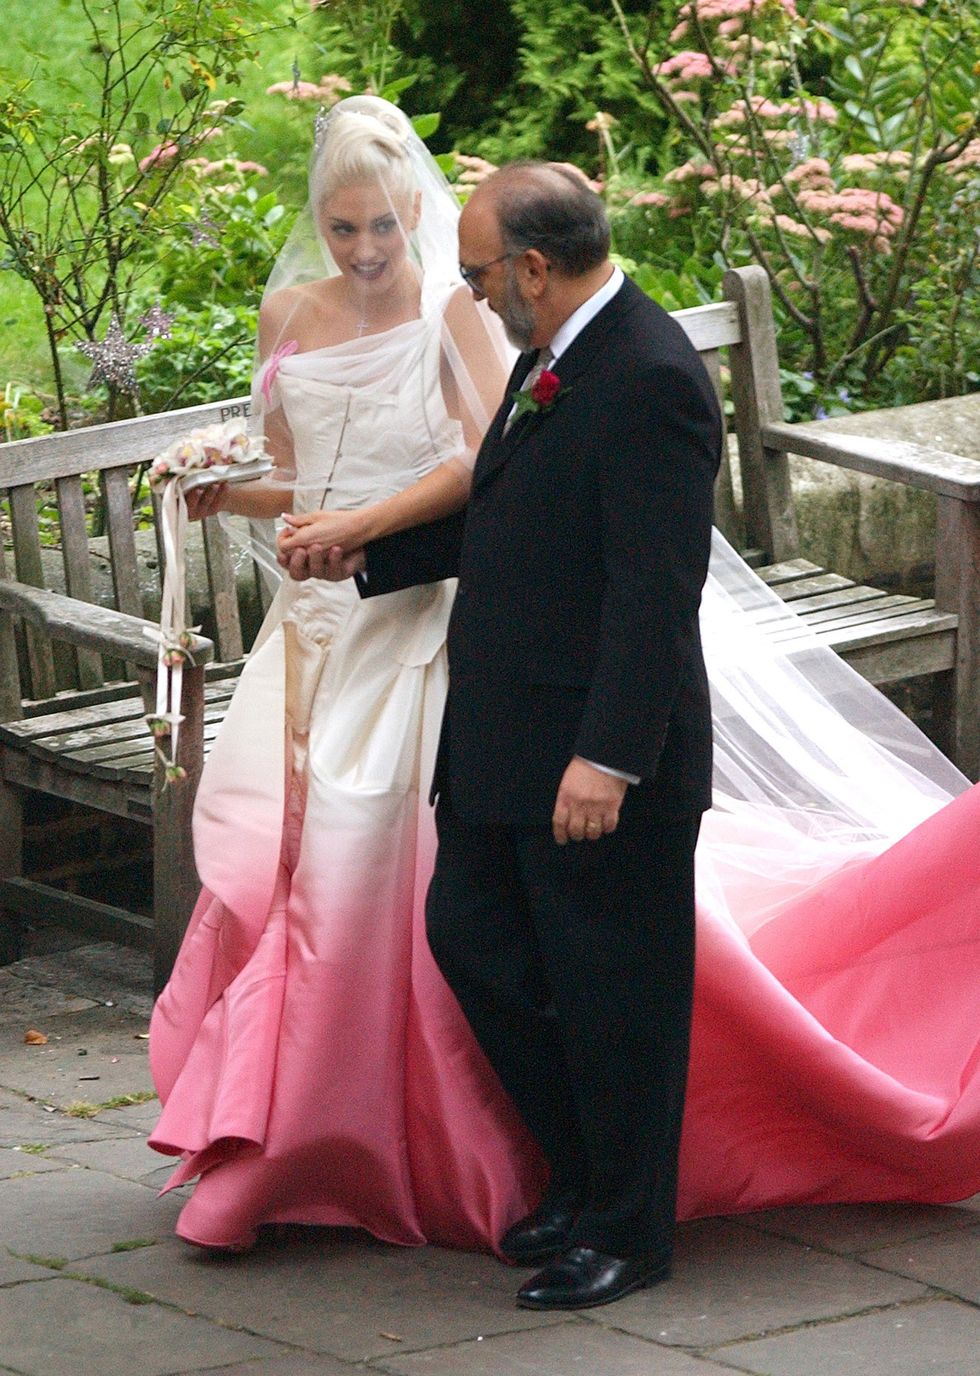 london, uk   september 9  gwen stefani with her father dennis stefani during the wedding ceremony of gwen stefani and gavin rossdale held on september 14, 2002 at st pauls cathedral in covent garden in london, england photo by james whatlinguk press via getty images